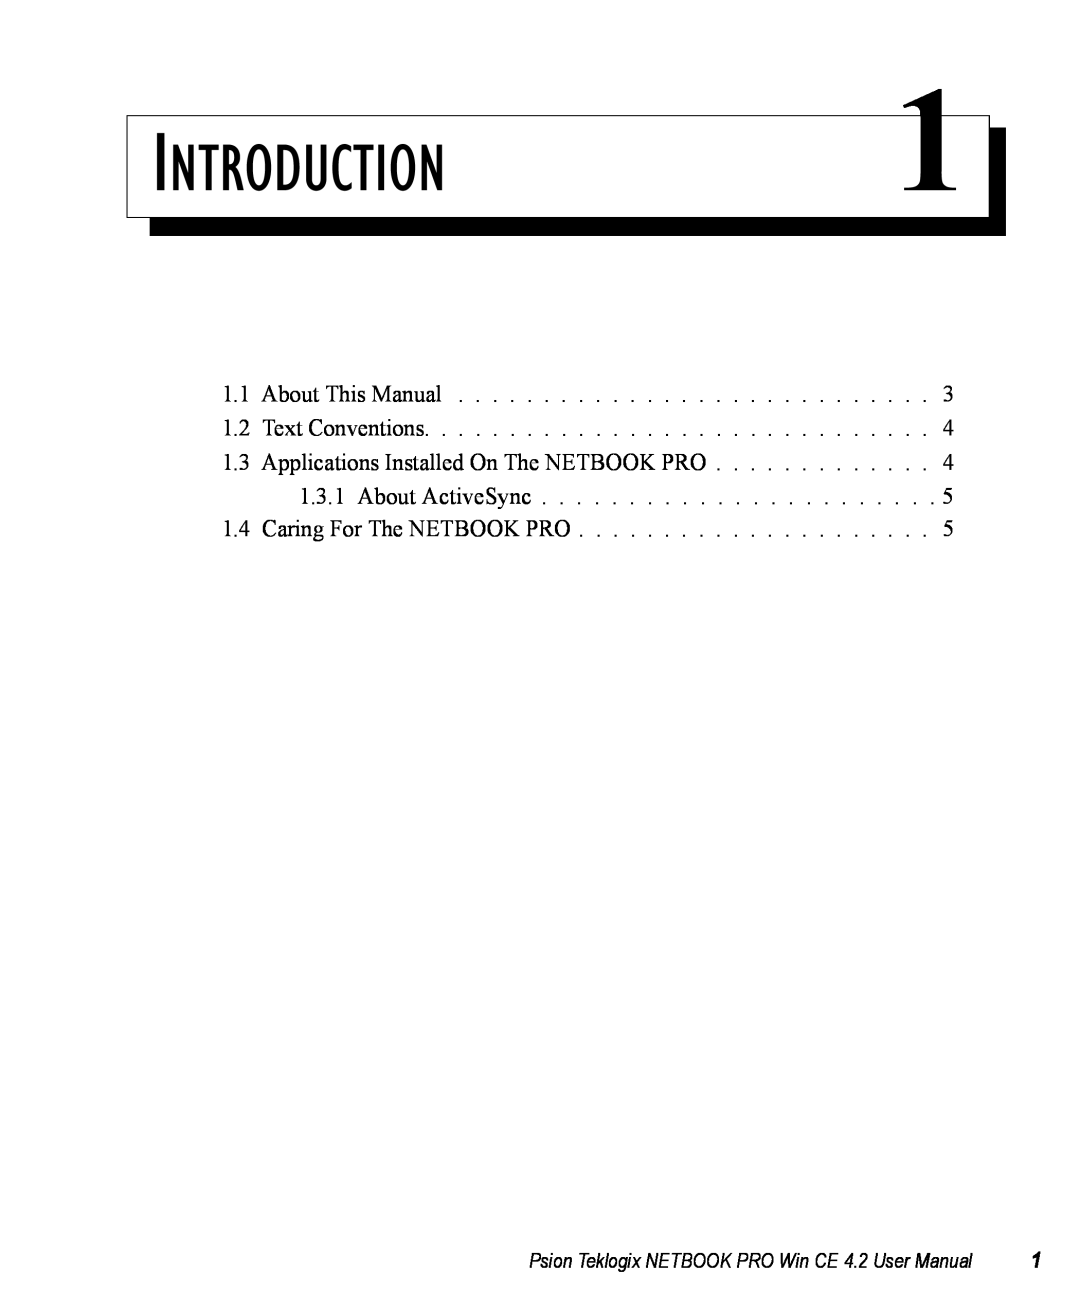 Psion Teklogix Win CE 4.2 user manual INTRODUCTION1, About This Manual 1.2 Text Conventions, Caring For The NETBOOK PRO 